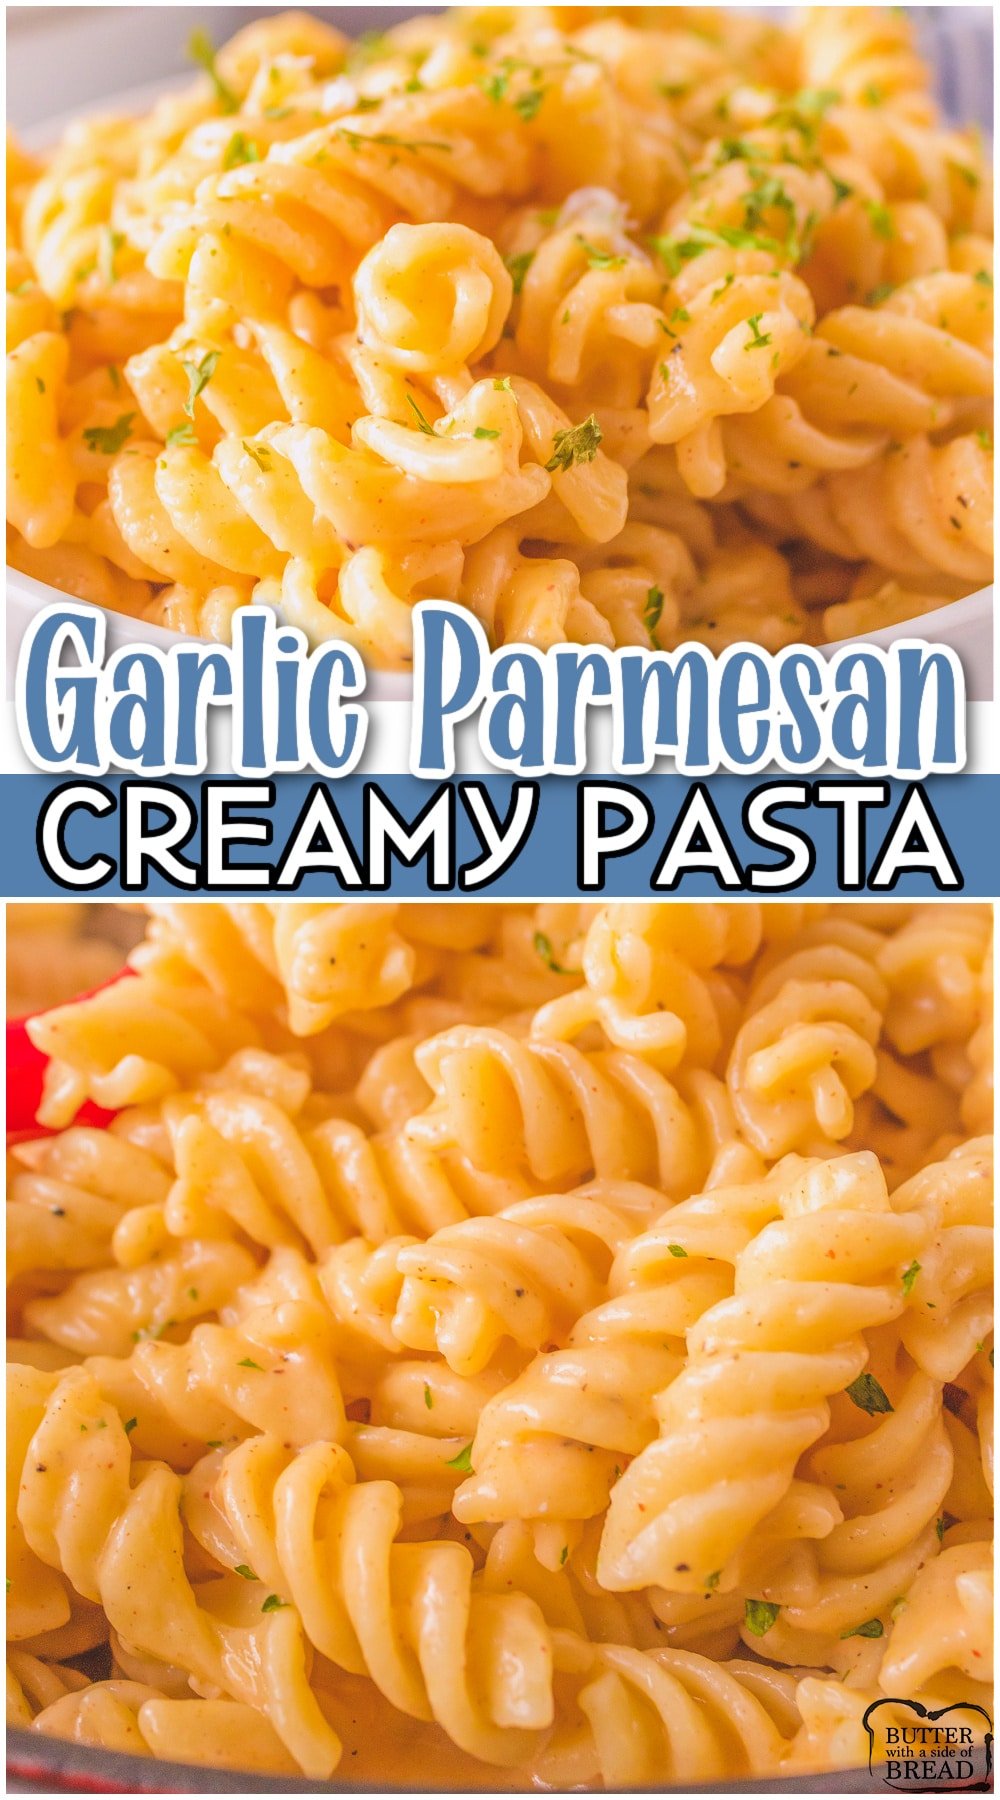 Creamy Garlic Parmesan Pasta made with Parmesan, garlic, butter, broth & simple seasonings for an easy, flavorful pasta dinner. This creamy parmesan pasta sauce is made from scratch and has the wonderful flavors of cheese and garlic in every bite.